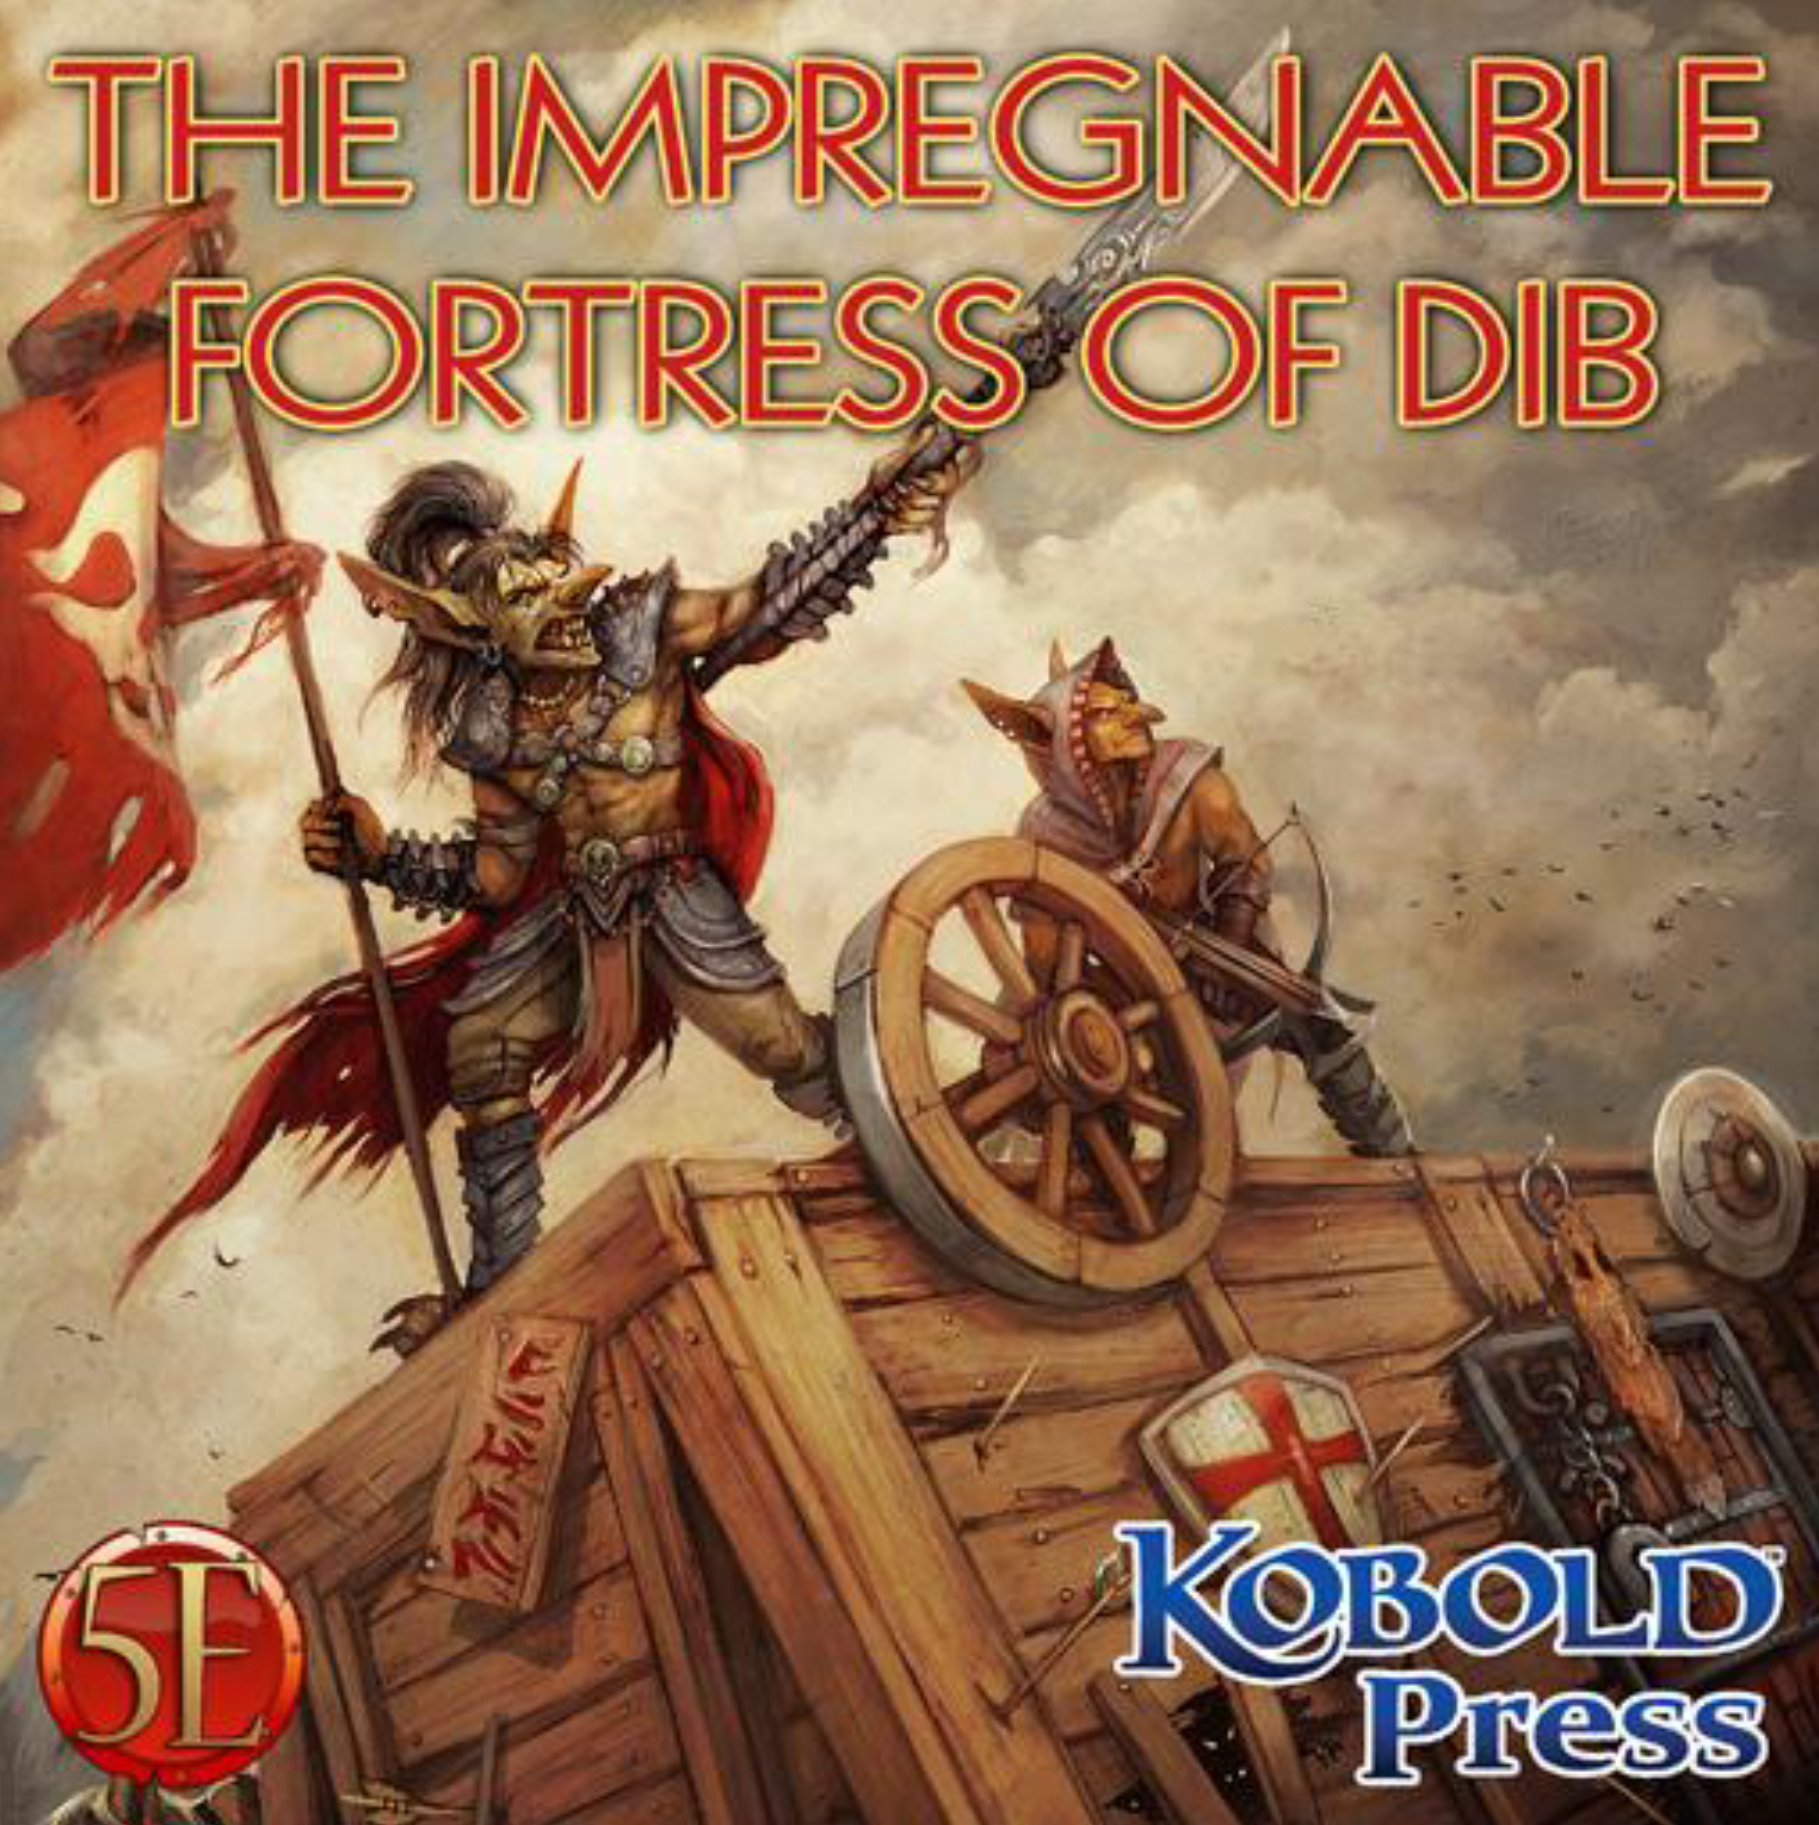 You are currently viewing The Impregnable Fortress of Dib